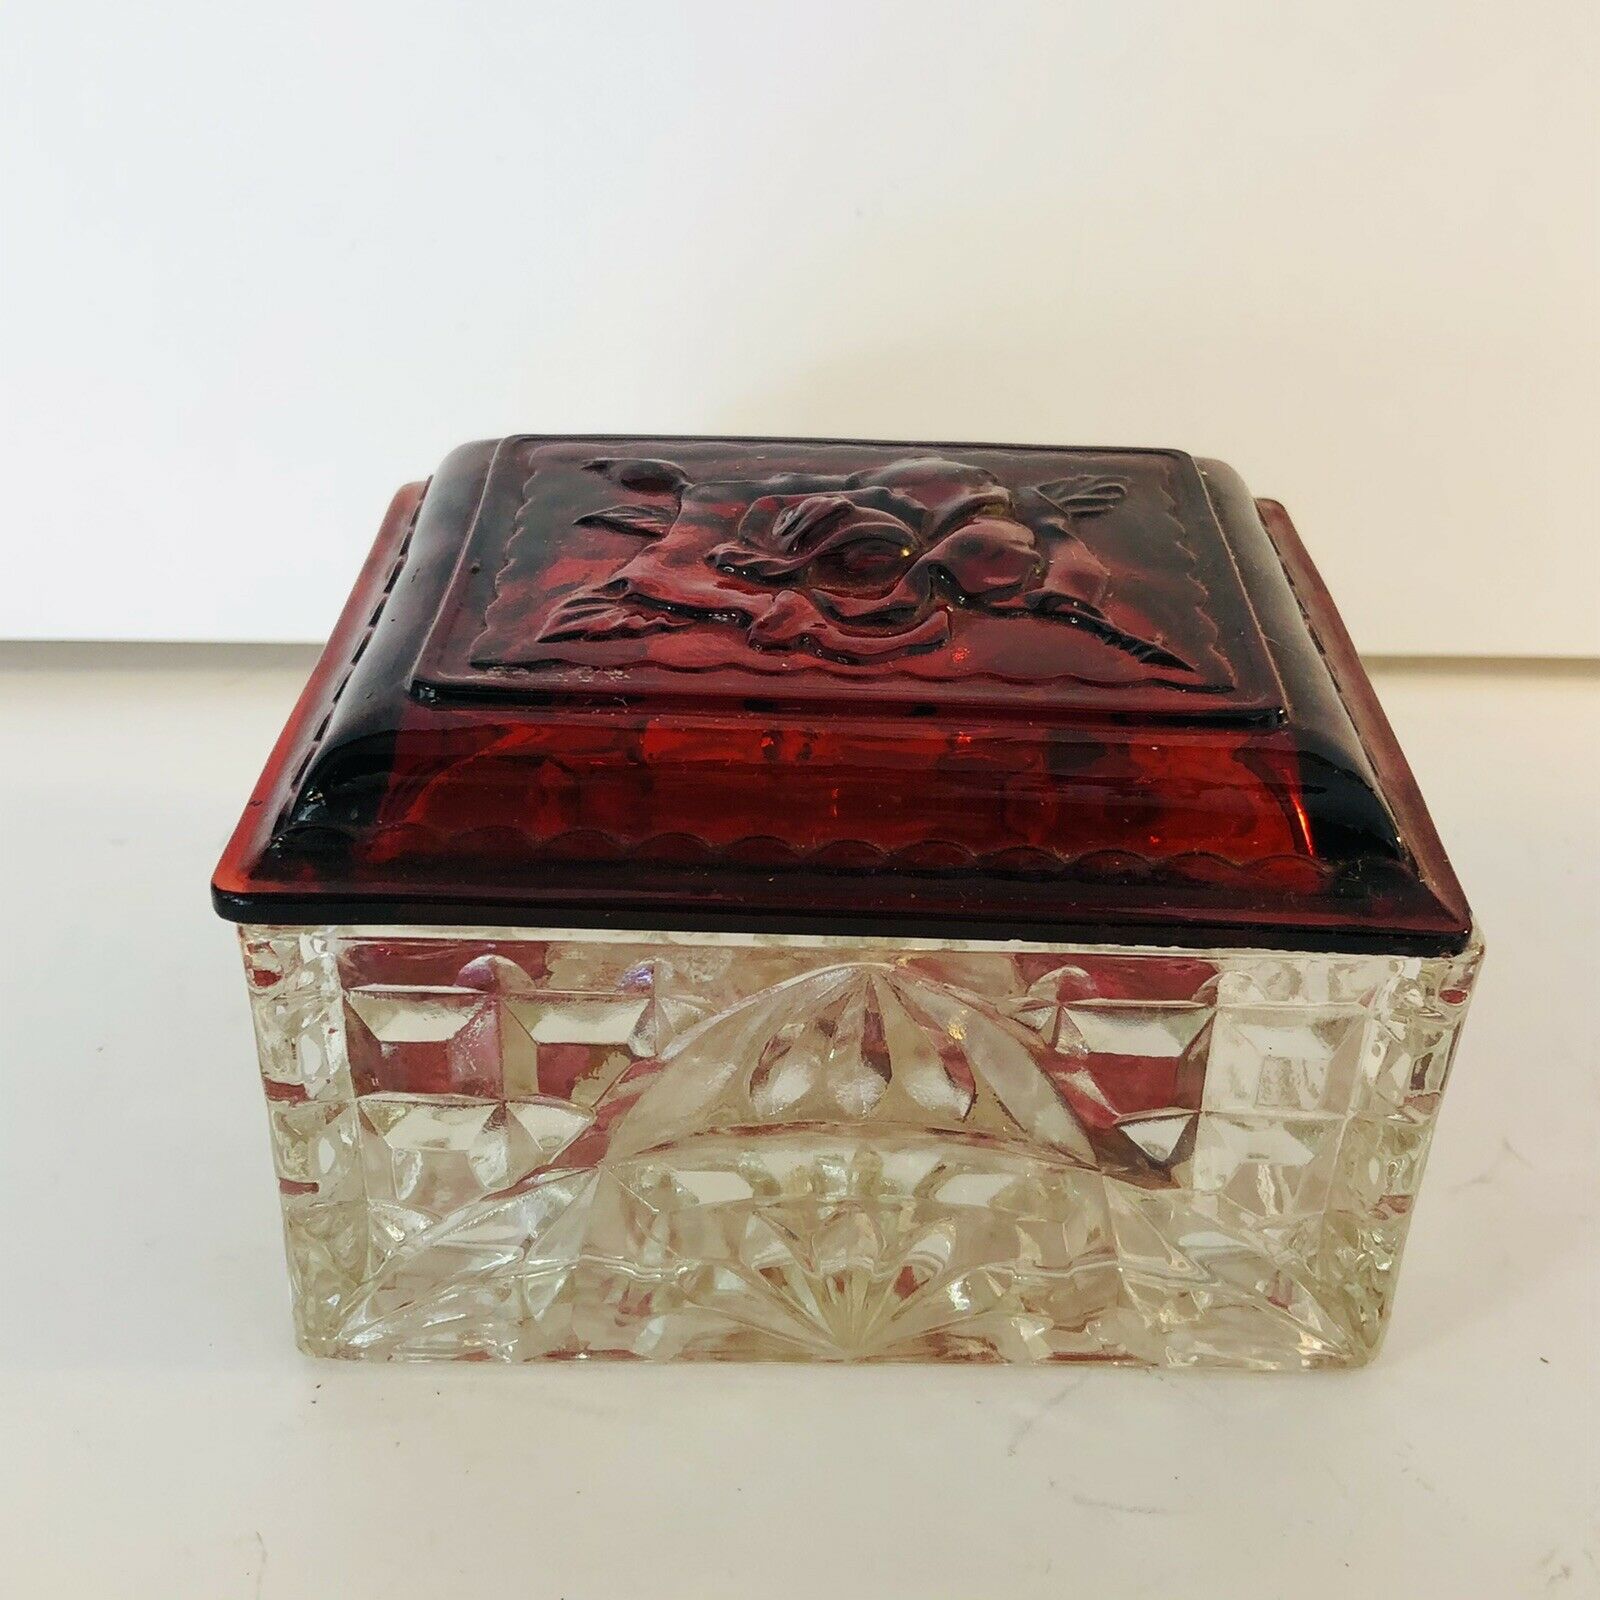 Vtg. Clear Glass Cigarette Box With Ruby Lid. Includes 2 Individual Ash Trays.